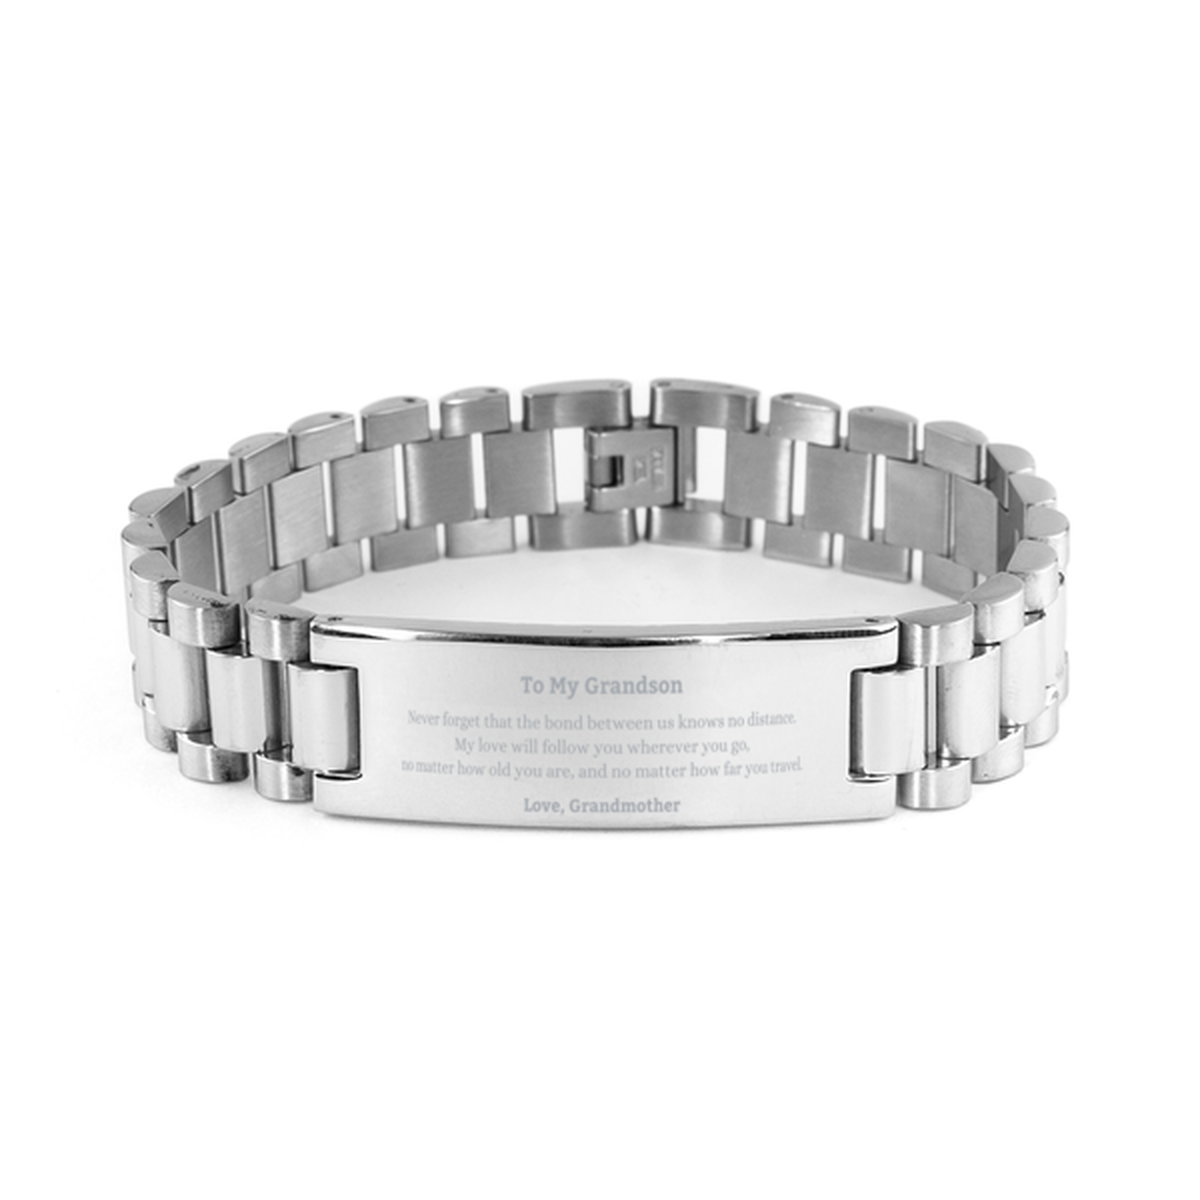 Grandson Birthday Gifts from Grandmother, Adjustable Ladder Stainless Steel Bracelet for Grandson Christmas Graduation Unique Gifts Grandson Never forget that the bond between us knows no distance. Love, Grandmother